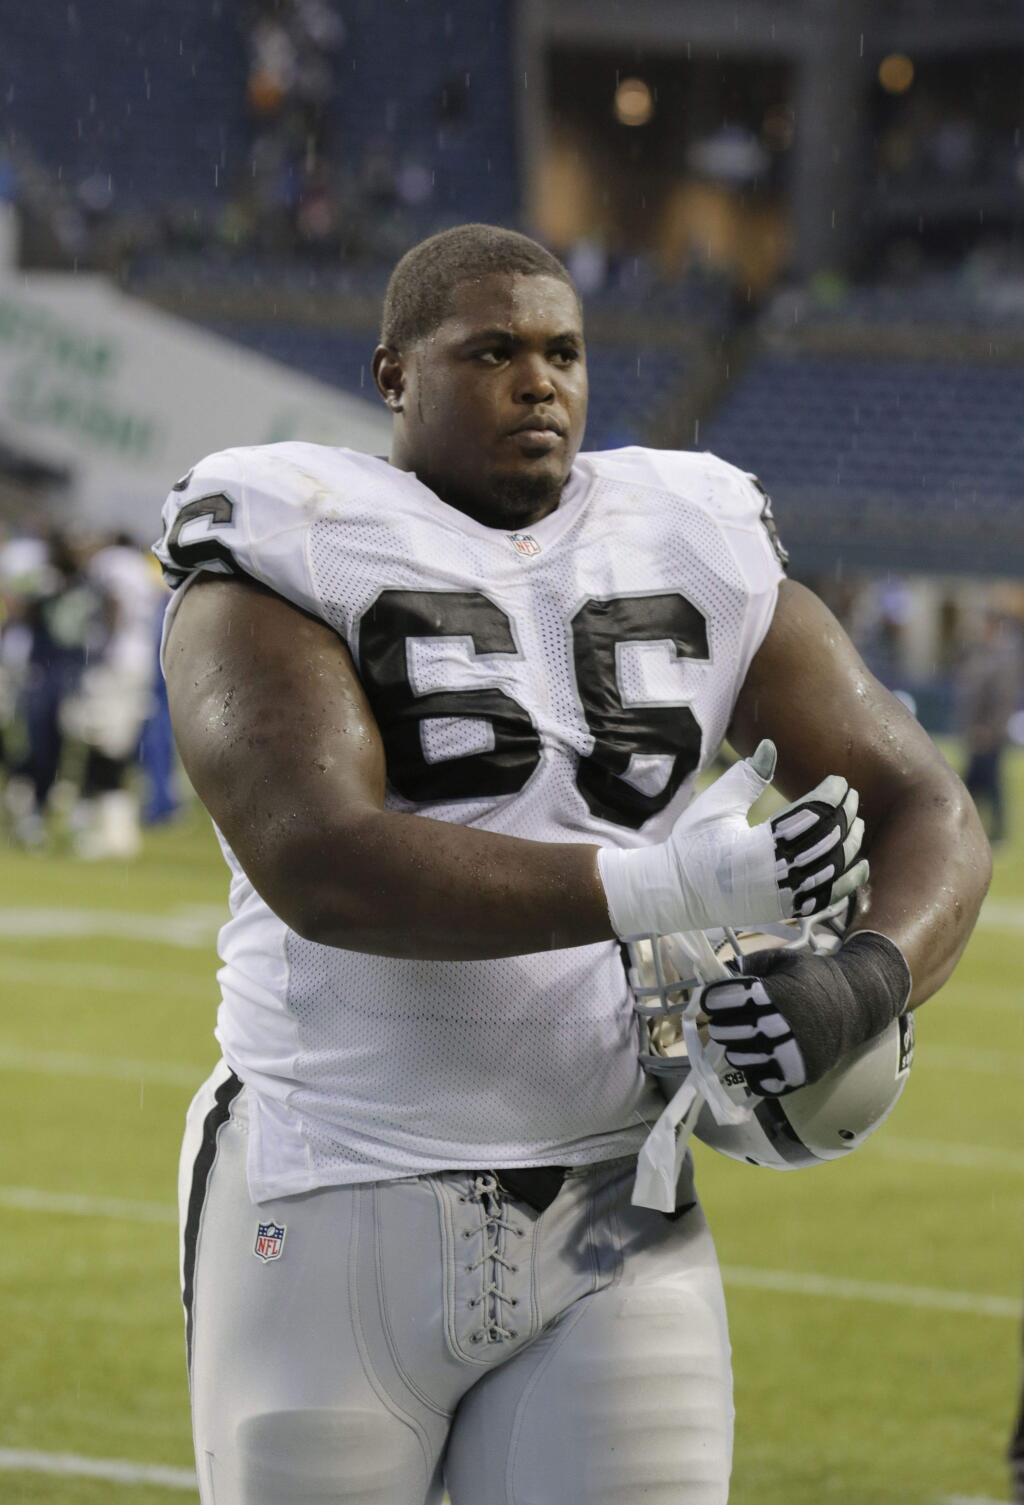 Oakland Raiders guard Gabe Jackson walks off the field after a game against the Seattle Seahawks, Sunday, Nov. 2, 2014, in Seattle. (AP Photo/Stephen Brashear)